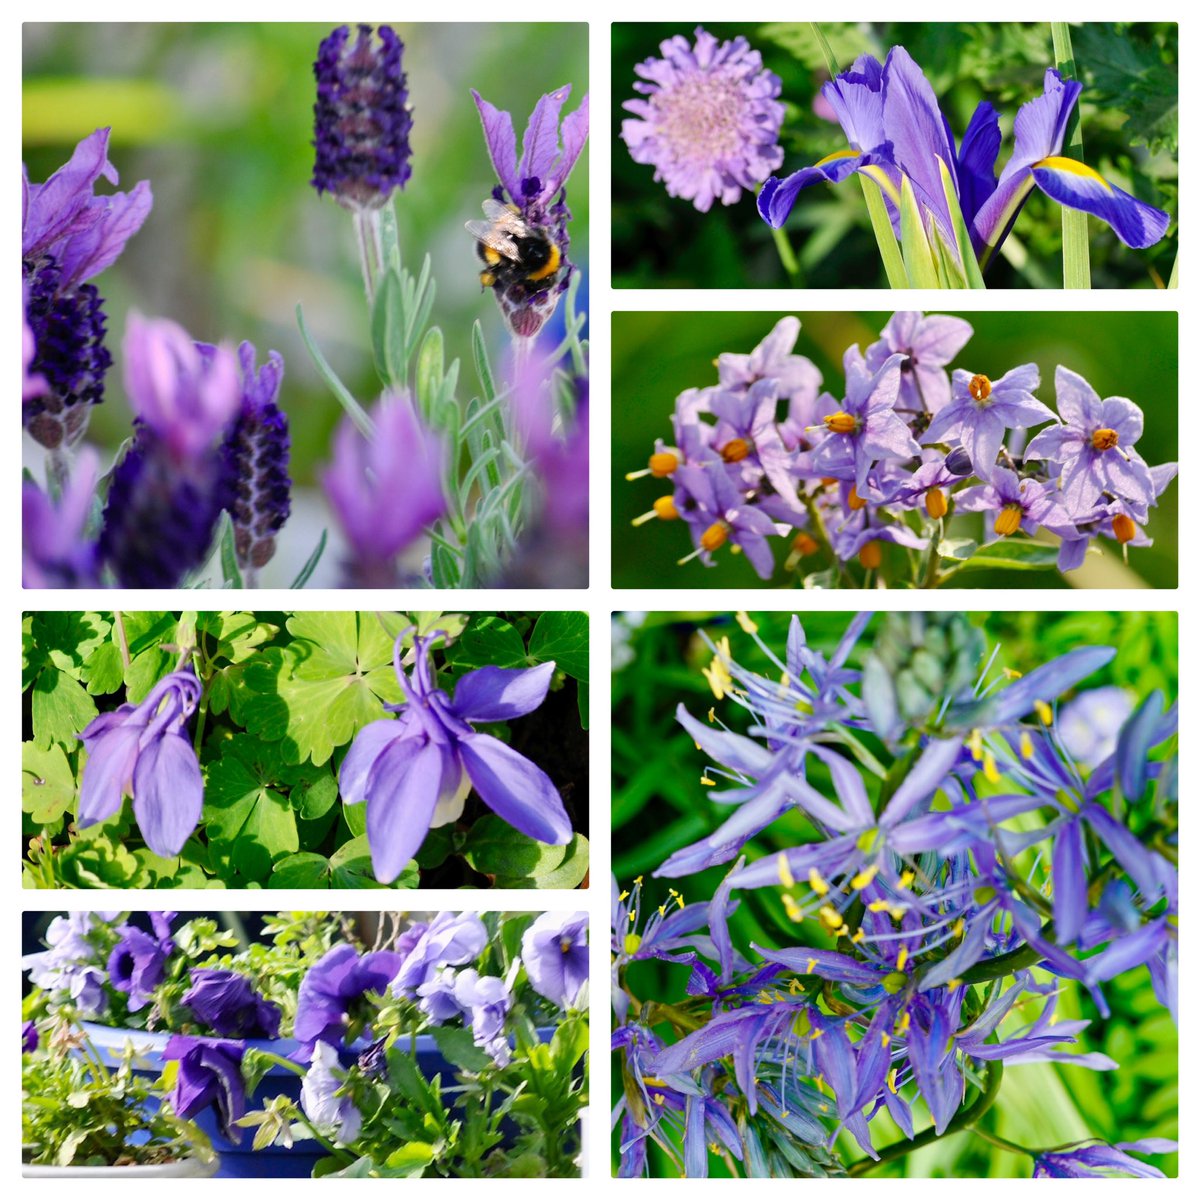 #SixOnSaturday Balcony blues and purples and a bee in the lavender!! Wishing you all a lovely weekend!! 🐝🌿💙💜💙🌿💙💜💙🌿🐝 #gardening #flowers #flowerreport #GardeningTwitter #purple #blue #balcony #ancoats #Manchester #sunshine #MyGarden #MyBalcony  #MayFlowers